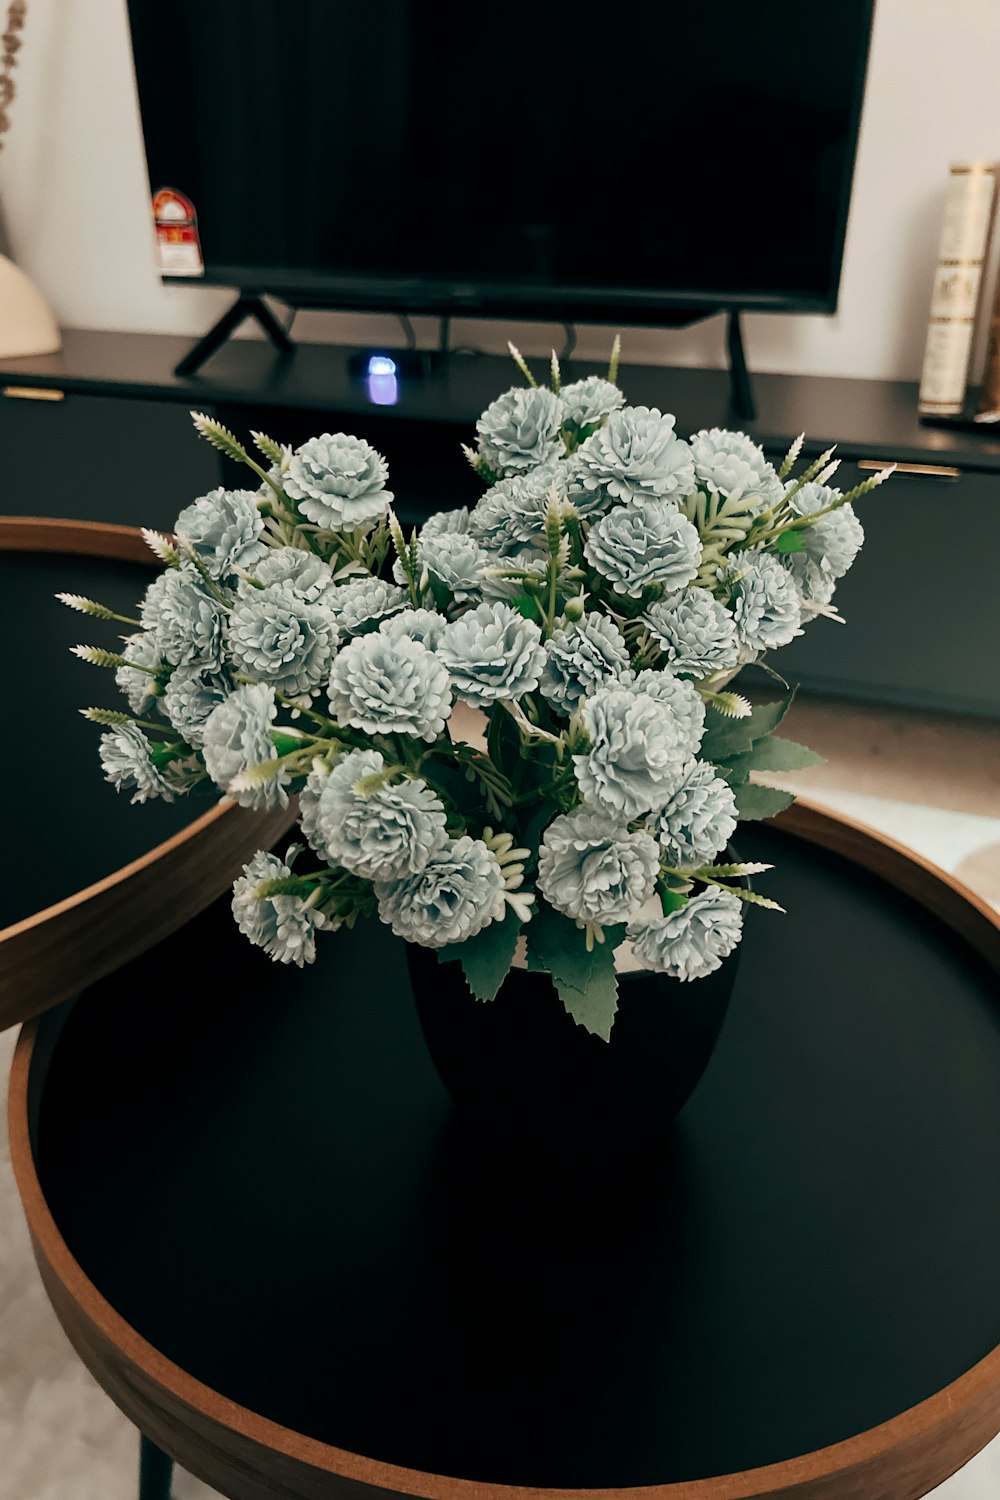 a vase of flowers sitting on a table in front of a tv